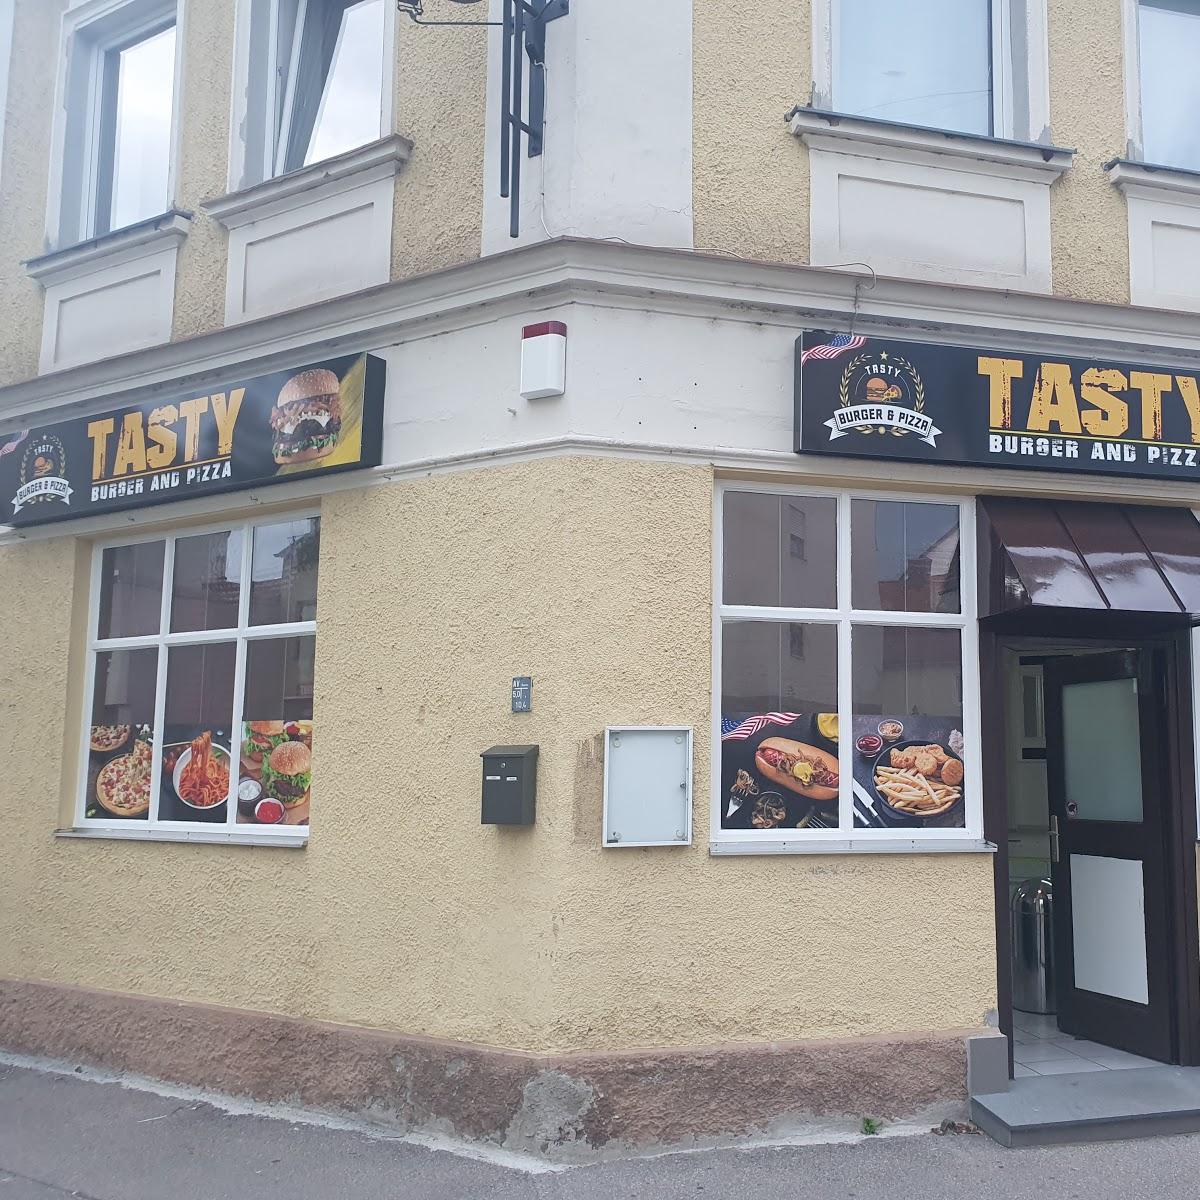 Restaurant "Tasty Burger and Pizza" in Augsburg